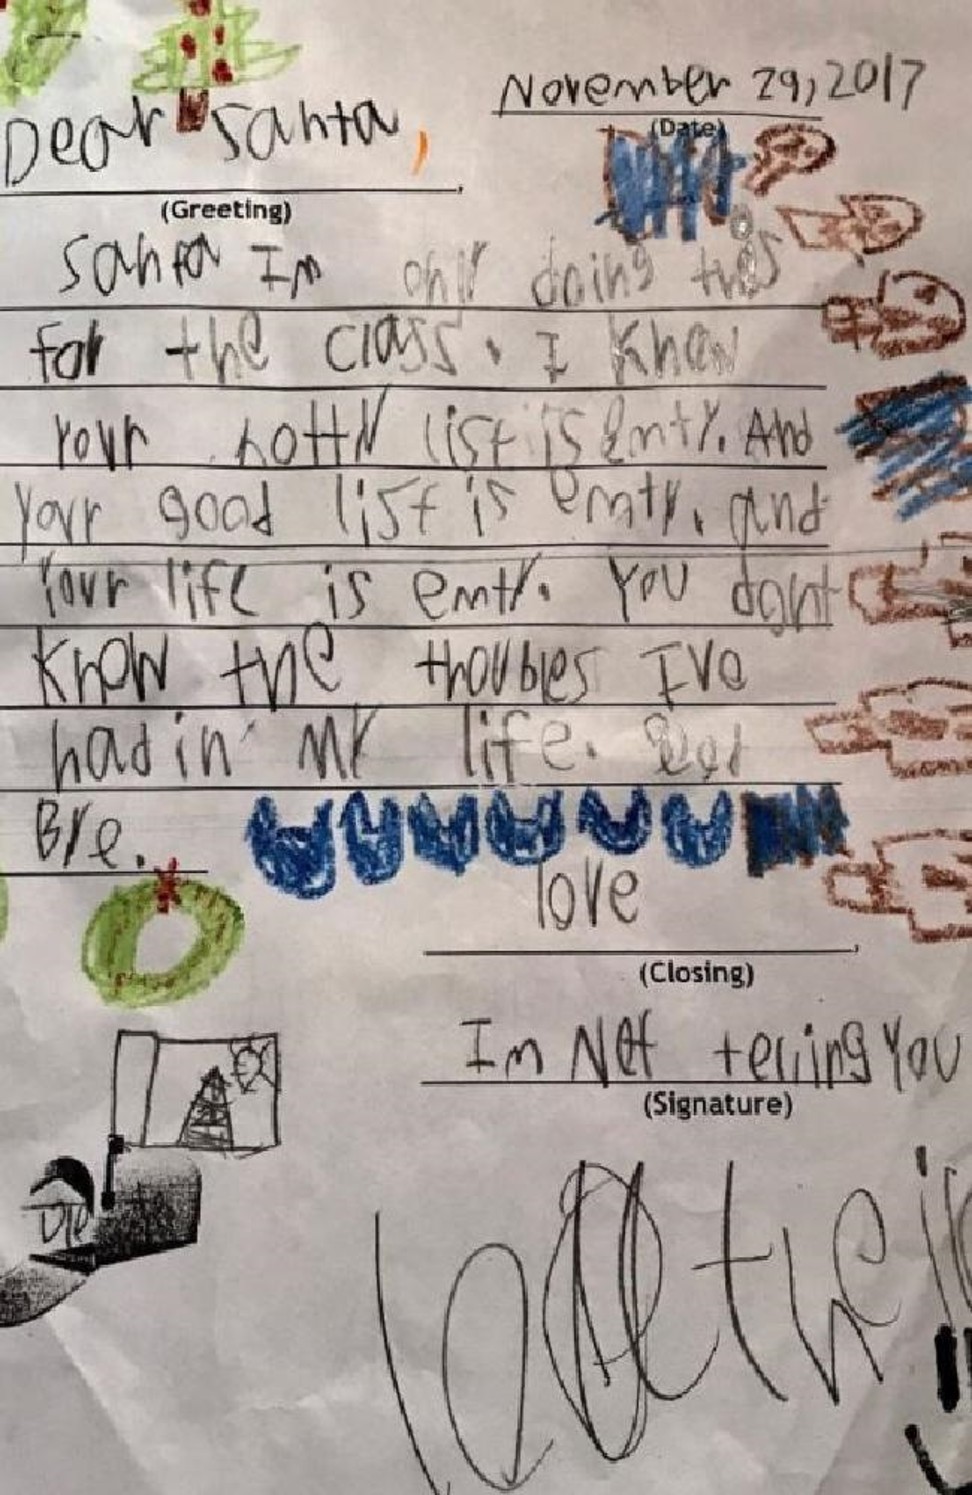 “You don't know the troubles I've had”. Sarah McCammon shared her son's cynical letter to Santa Claus. Photo: Twitter / Sarah McCammon